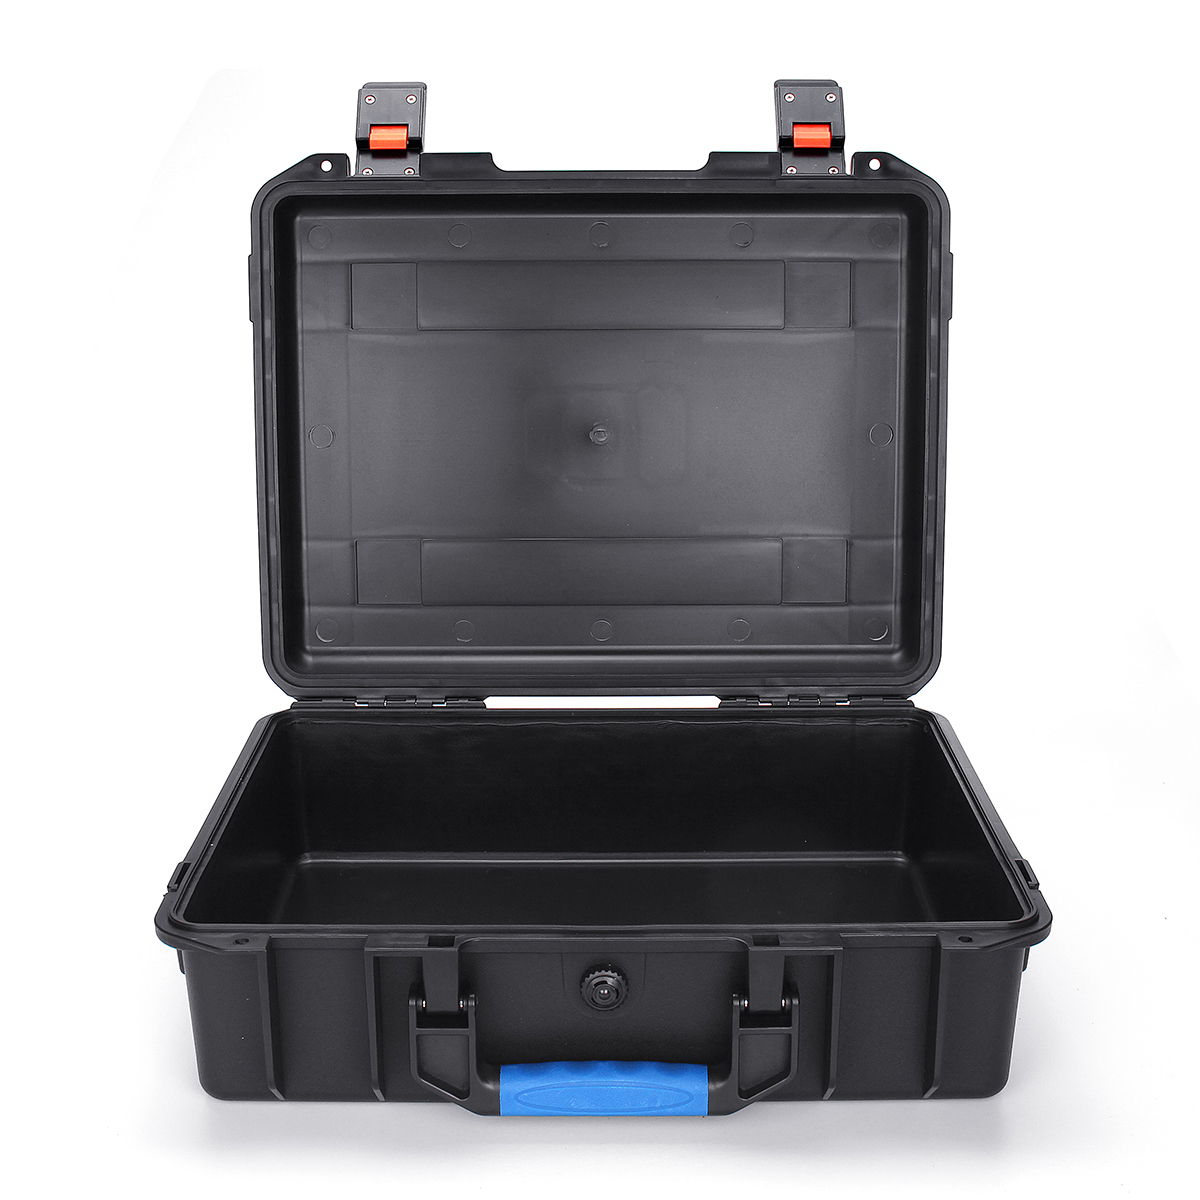 Waterproof-Hard-Carry-Case-Tool-Kits-Impact-Resistant-Shockproof-Storage-Box-Safety-Hardware-toolbox-1665199-2